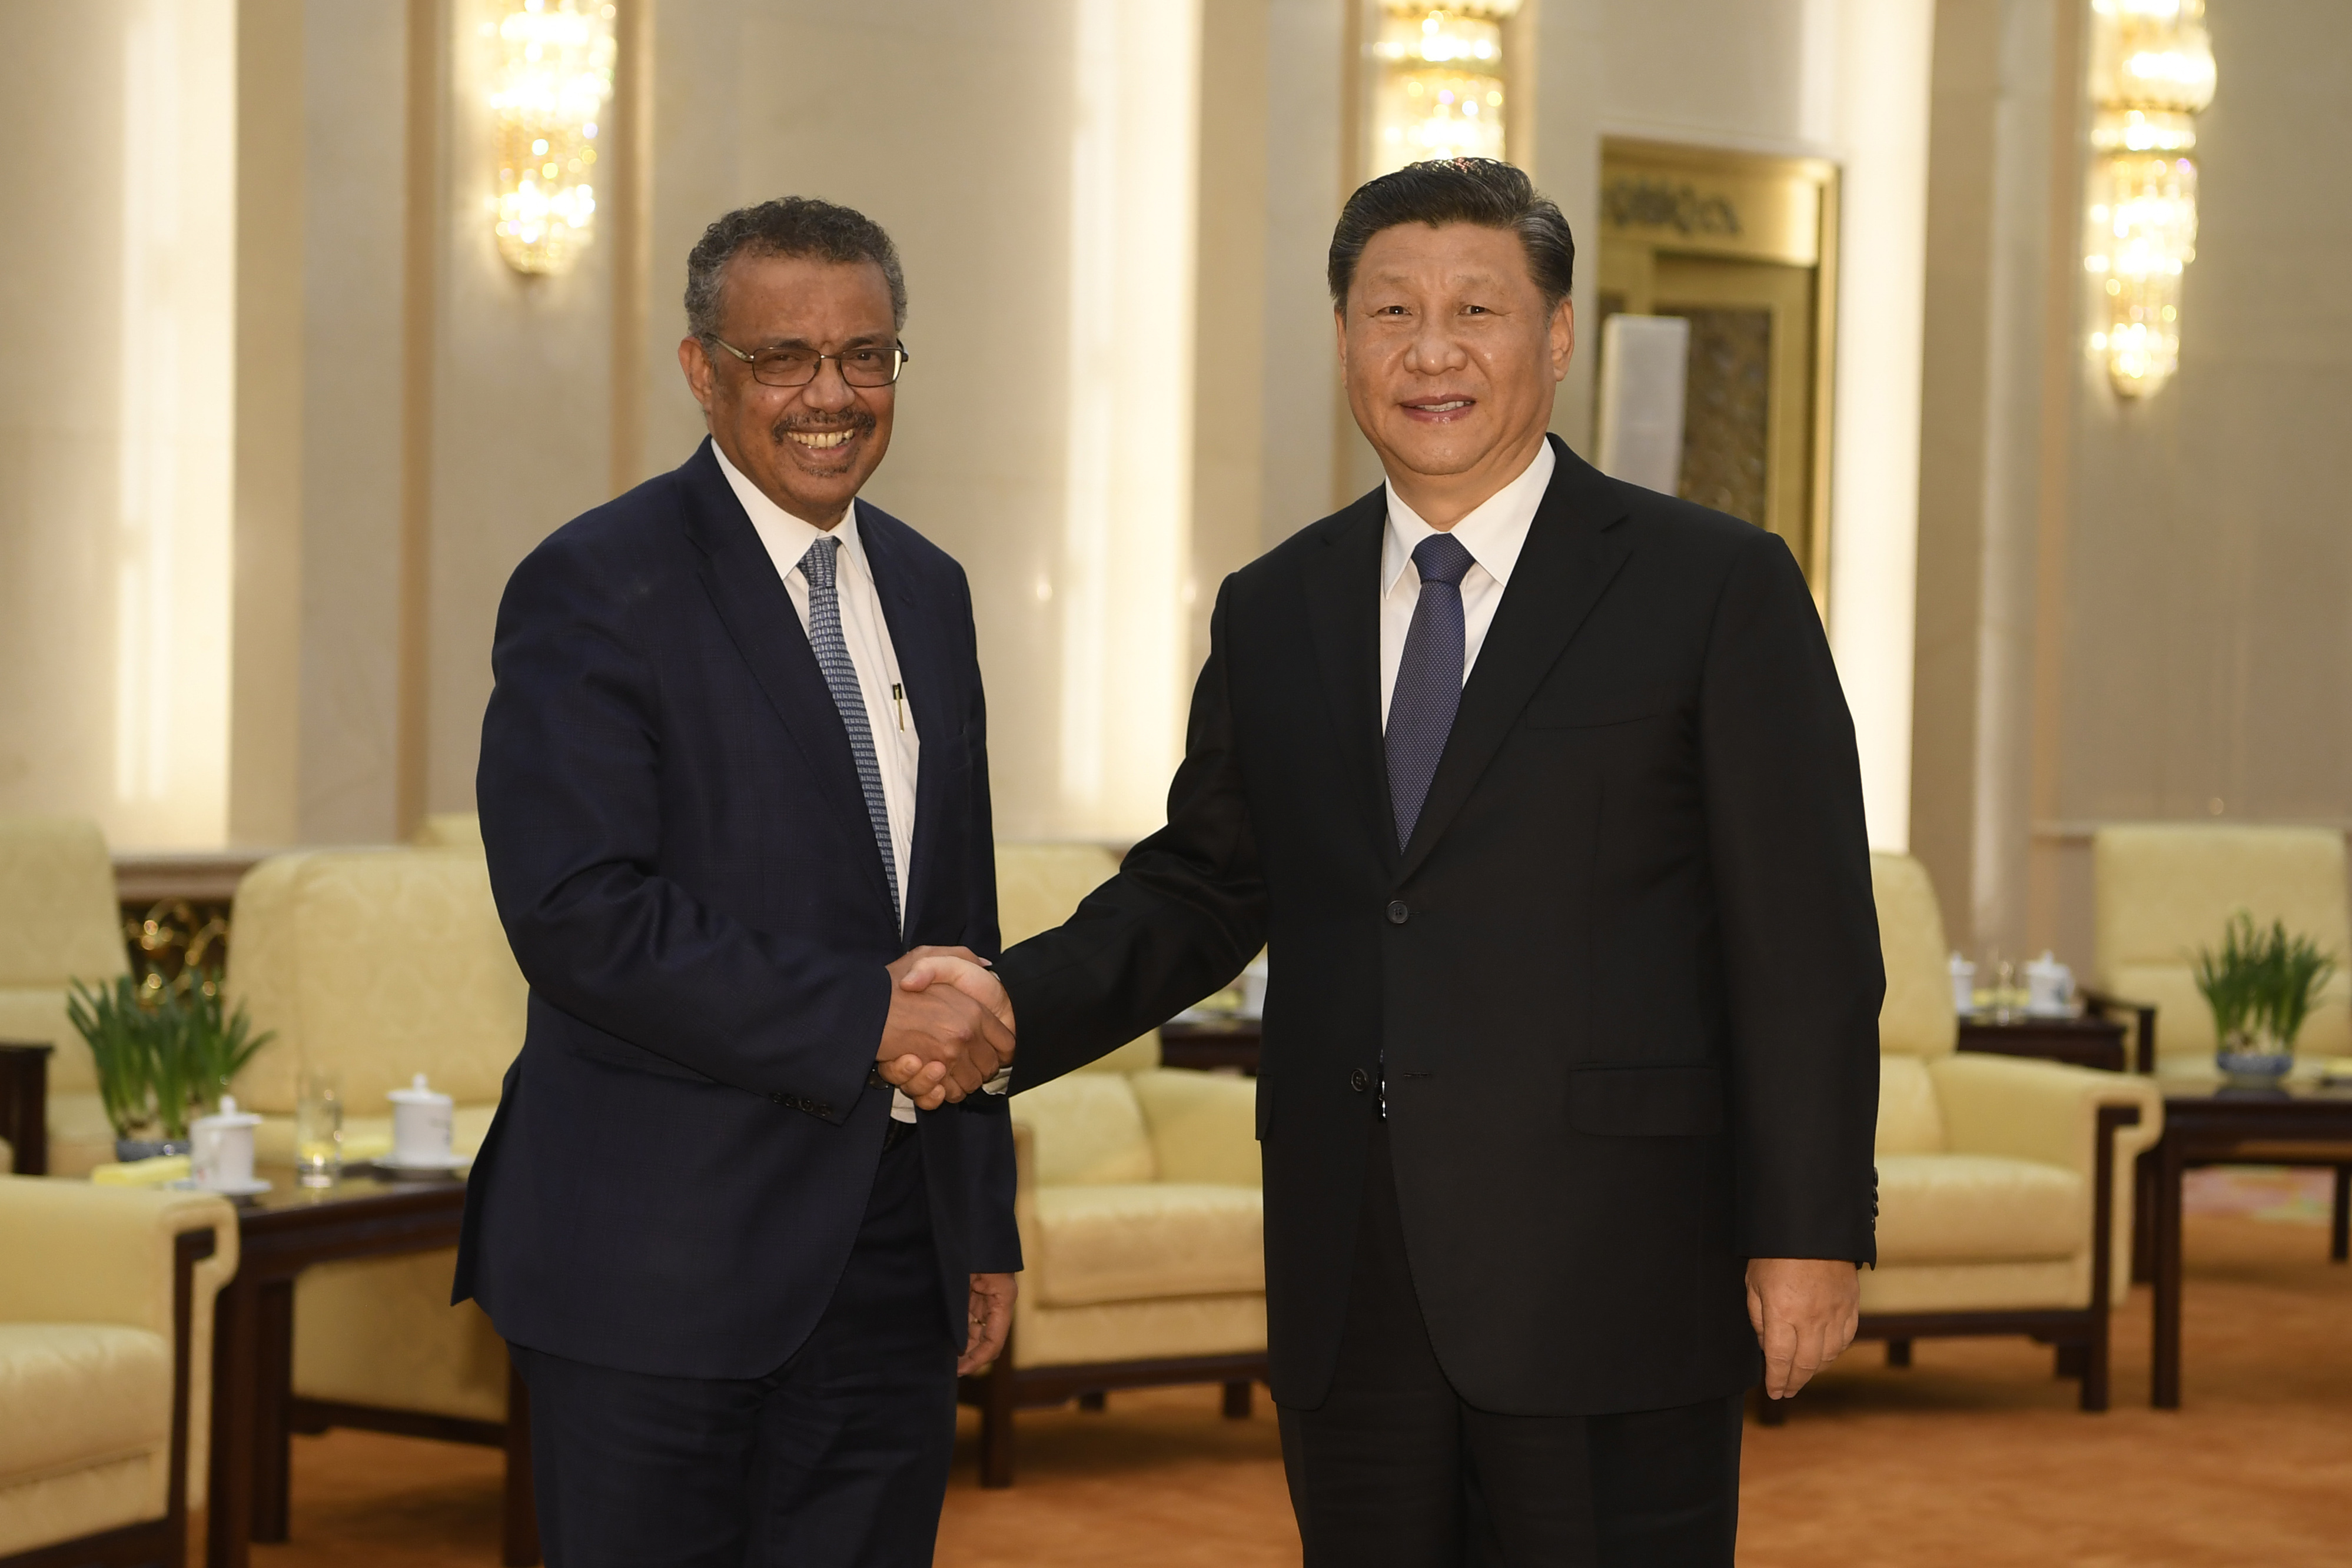 Tedros Adhanom, director general of the World Health Organization, left, shakes hands with Xi Jinping before a meeting at the Great Hall of the People in Beijing, on January 28, 2020